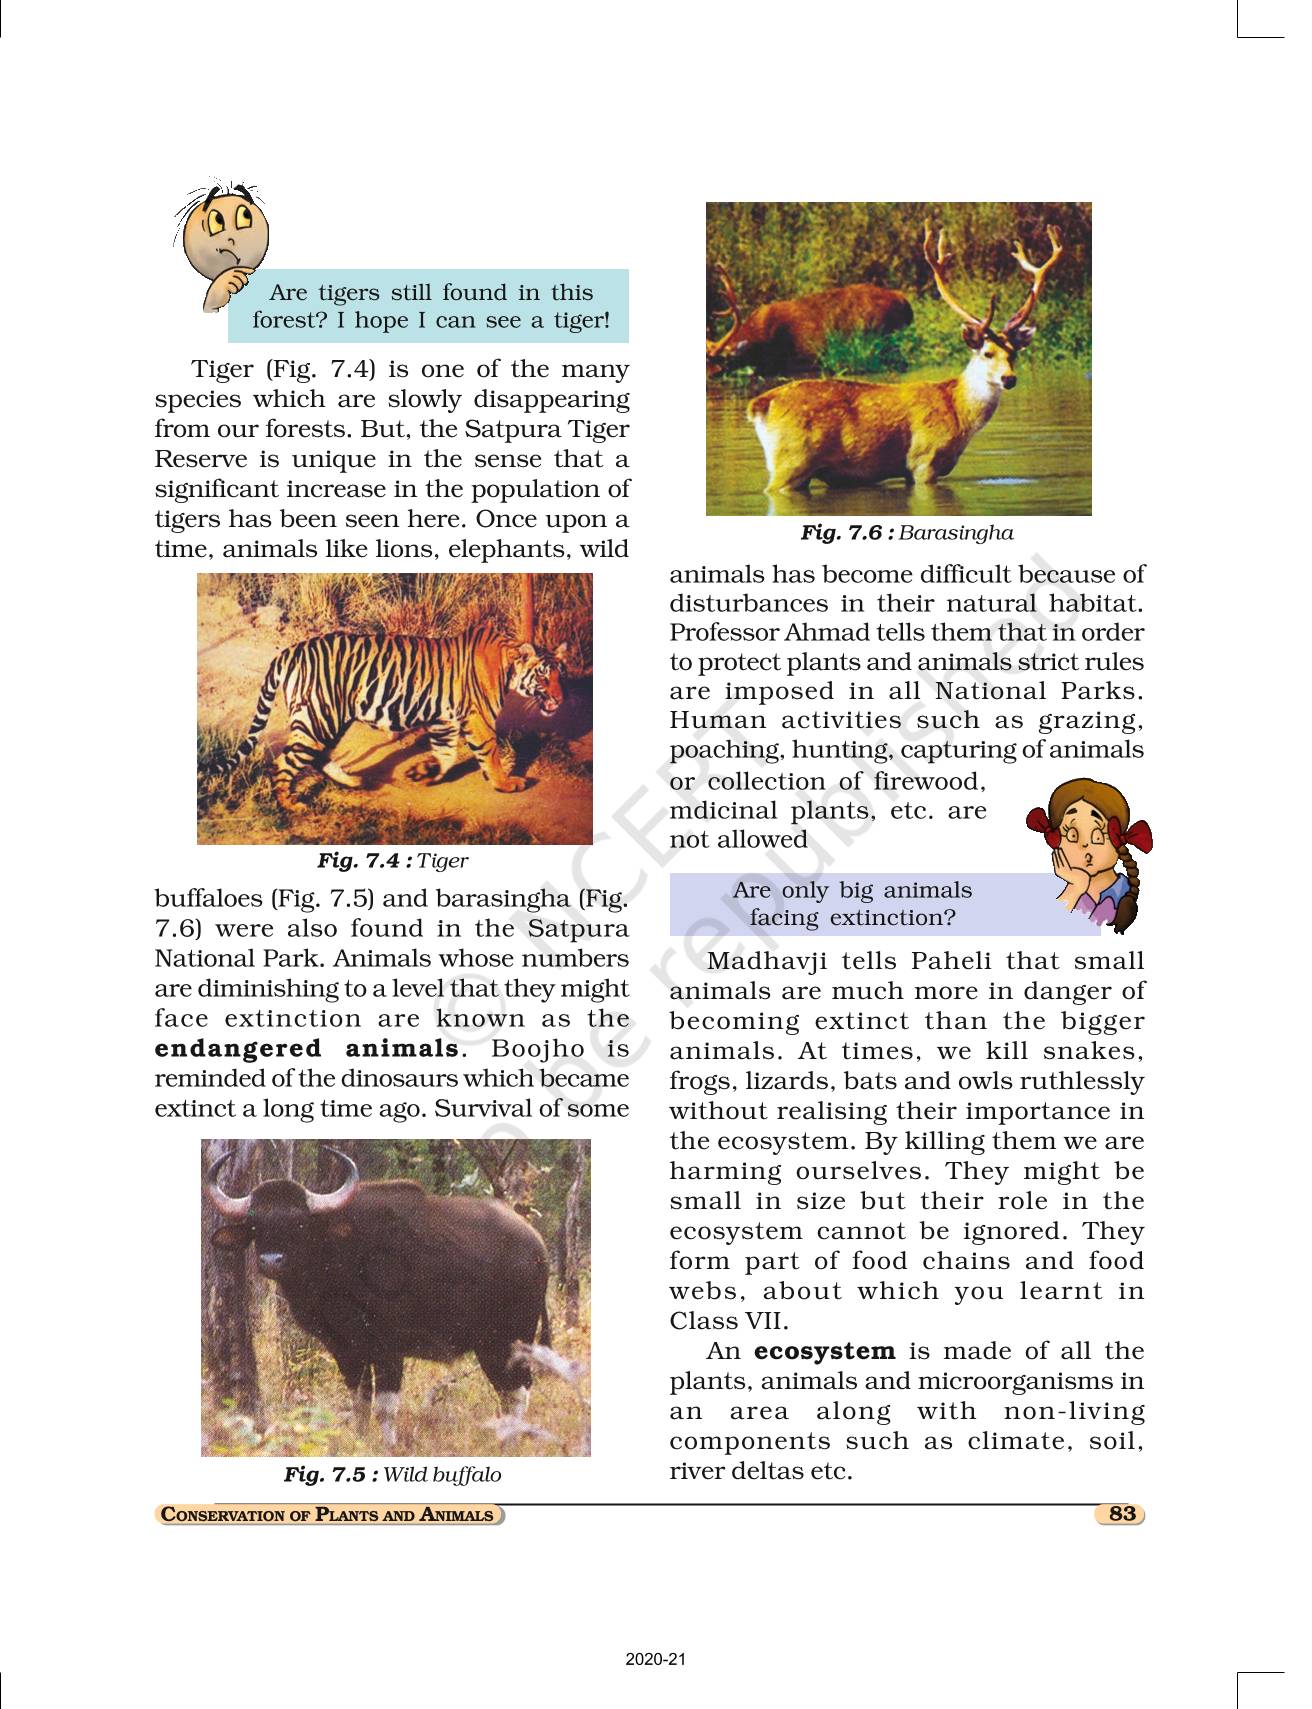 Conservation Of Plants And Animals - NCERT Book of Class 8 Science